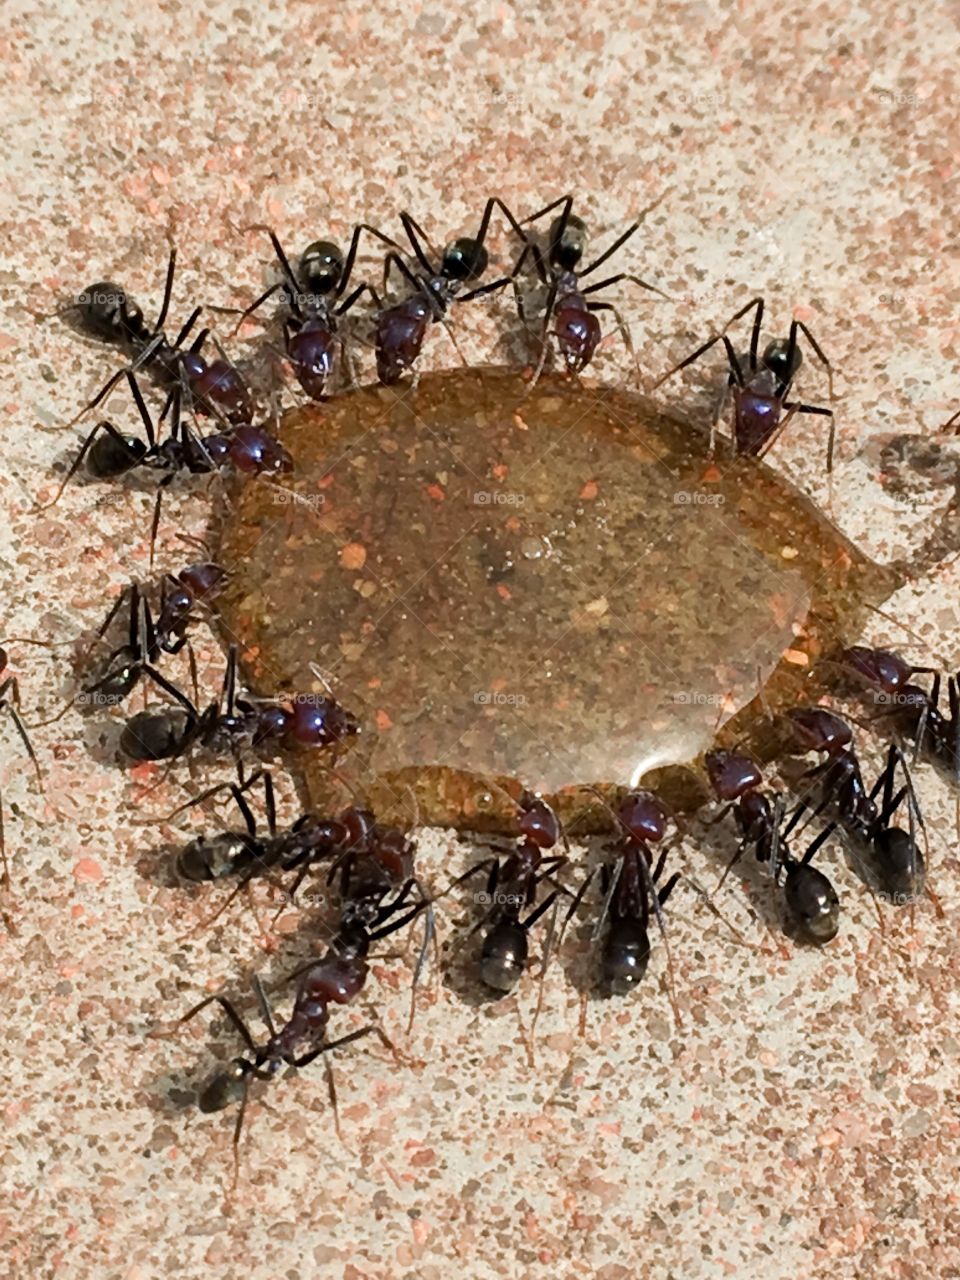 Giant Viti g worker ants feeding together from food source 